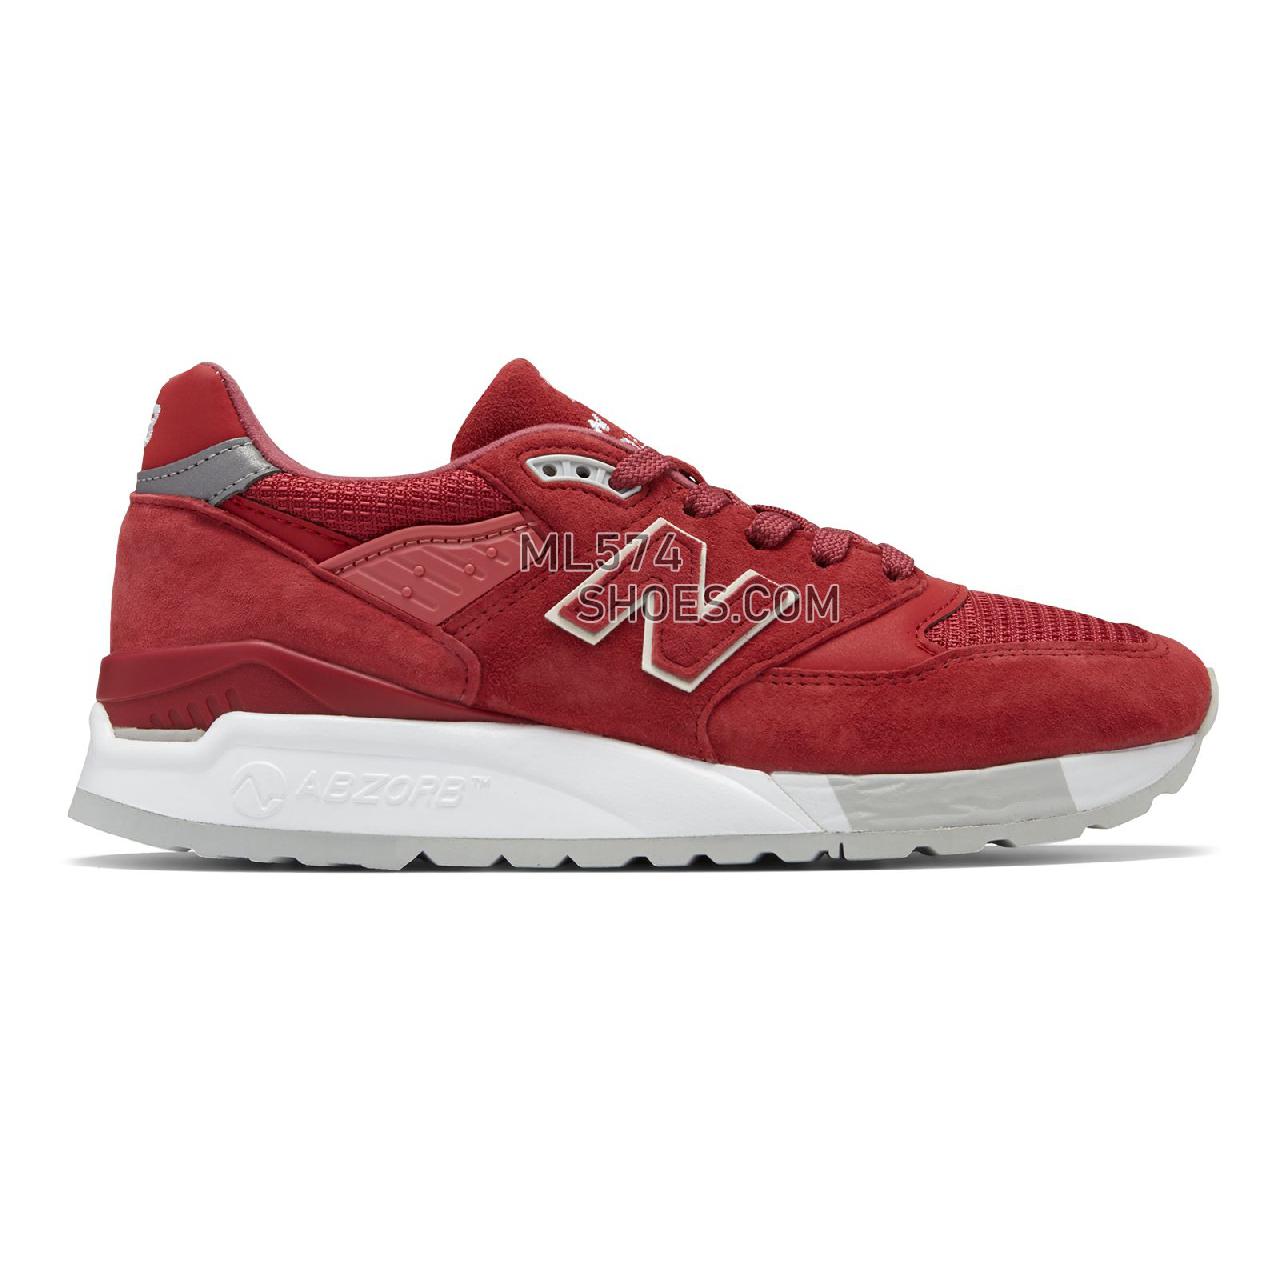 New Balance 998 Made in US - Women's 998 - Classic Red with White - W998RBE